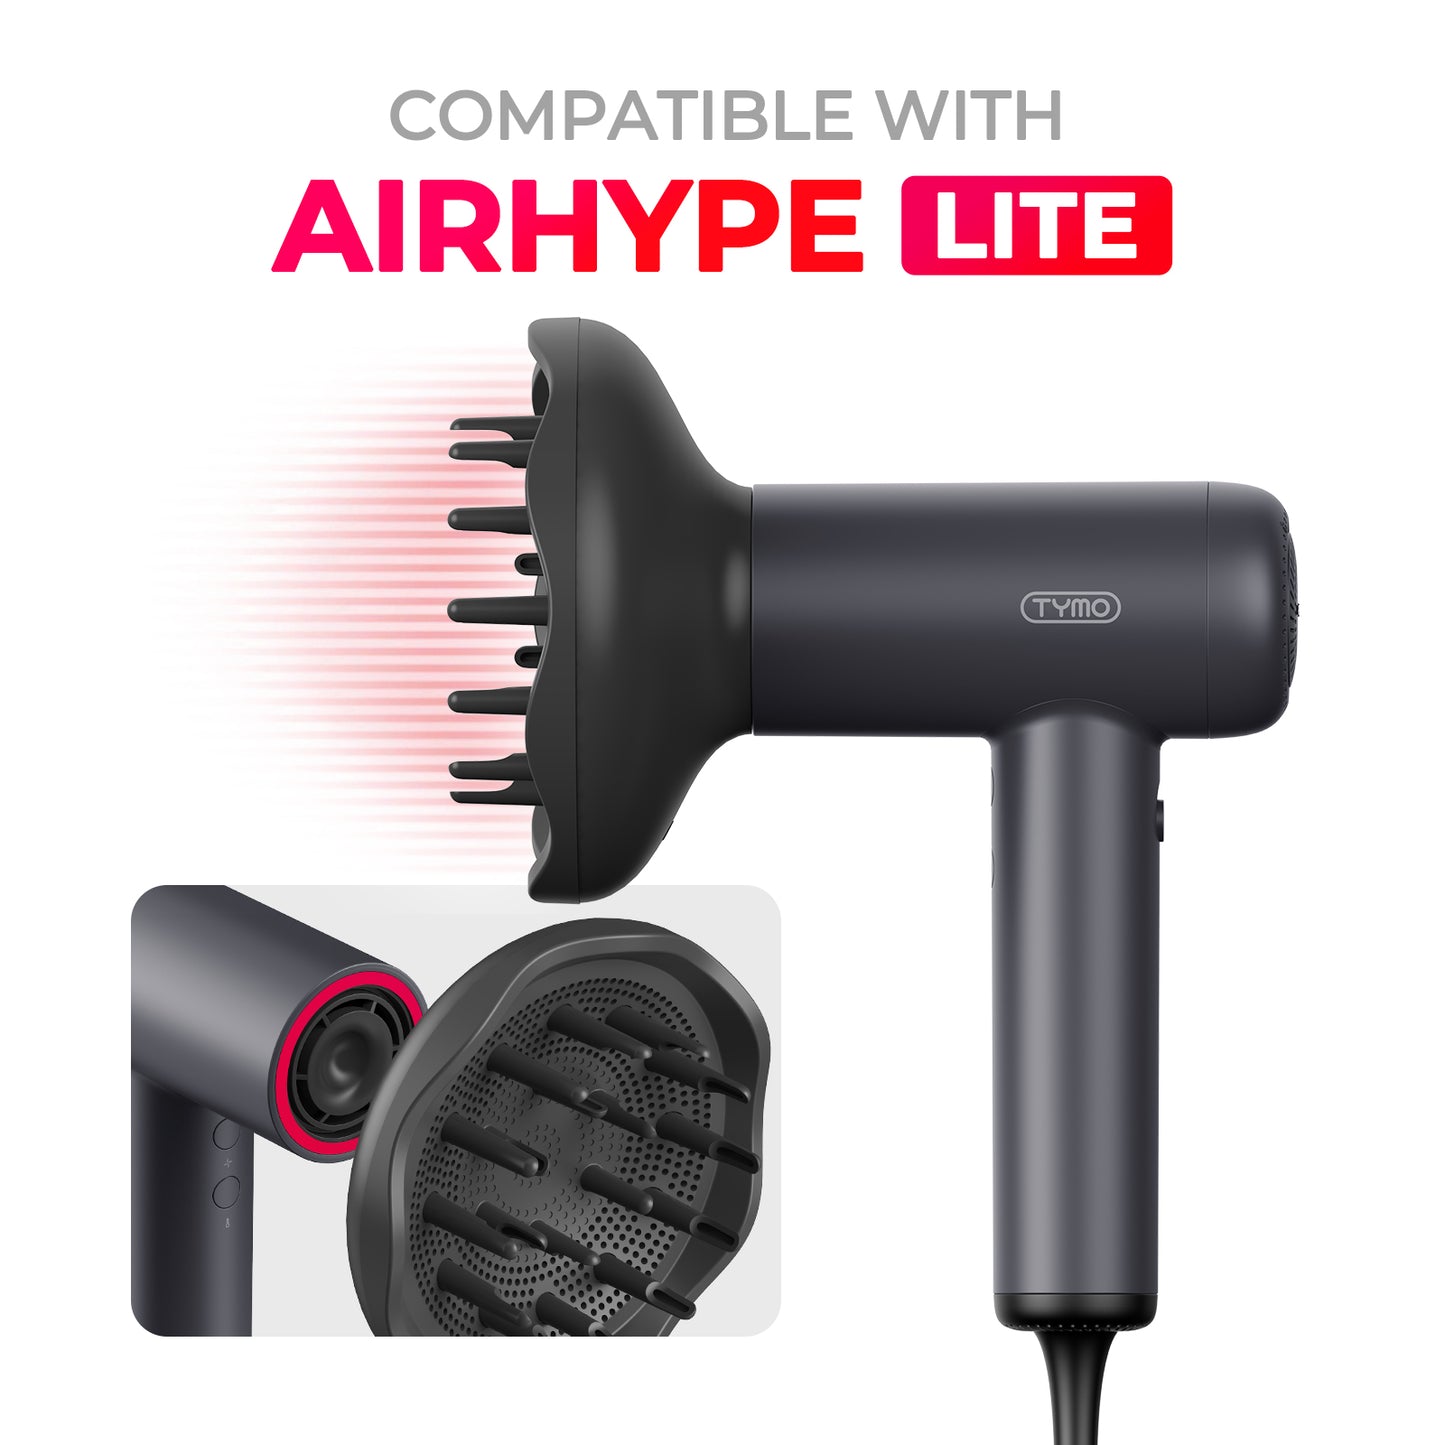 
                  
                    Adjustable Hair Diffuser for AIRHYPE LITE Dryer
                  
                